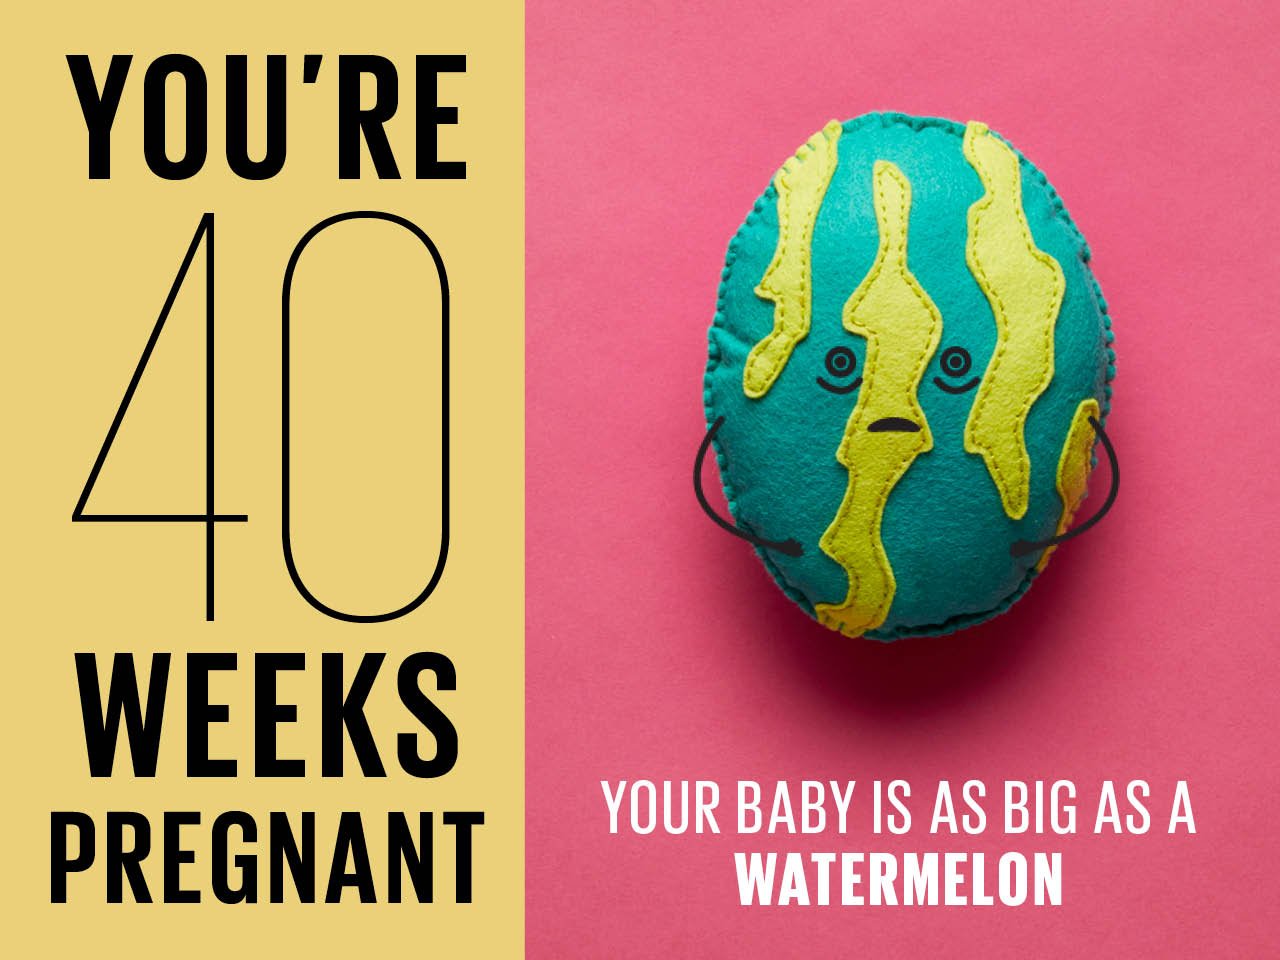 Felt watermelon used to show how big baby is at 40 weeks